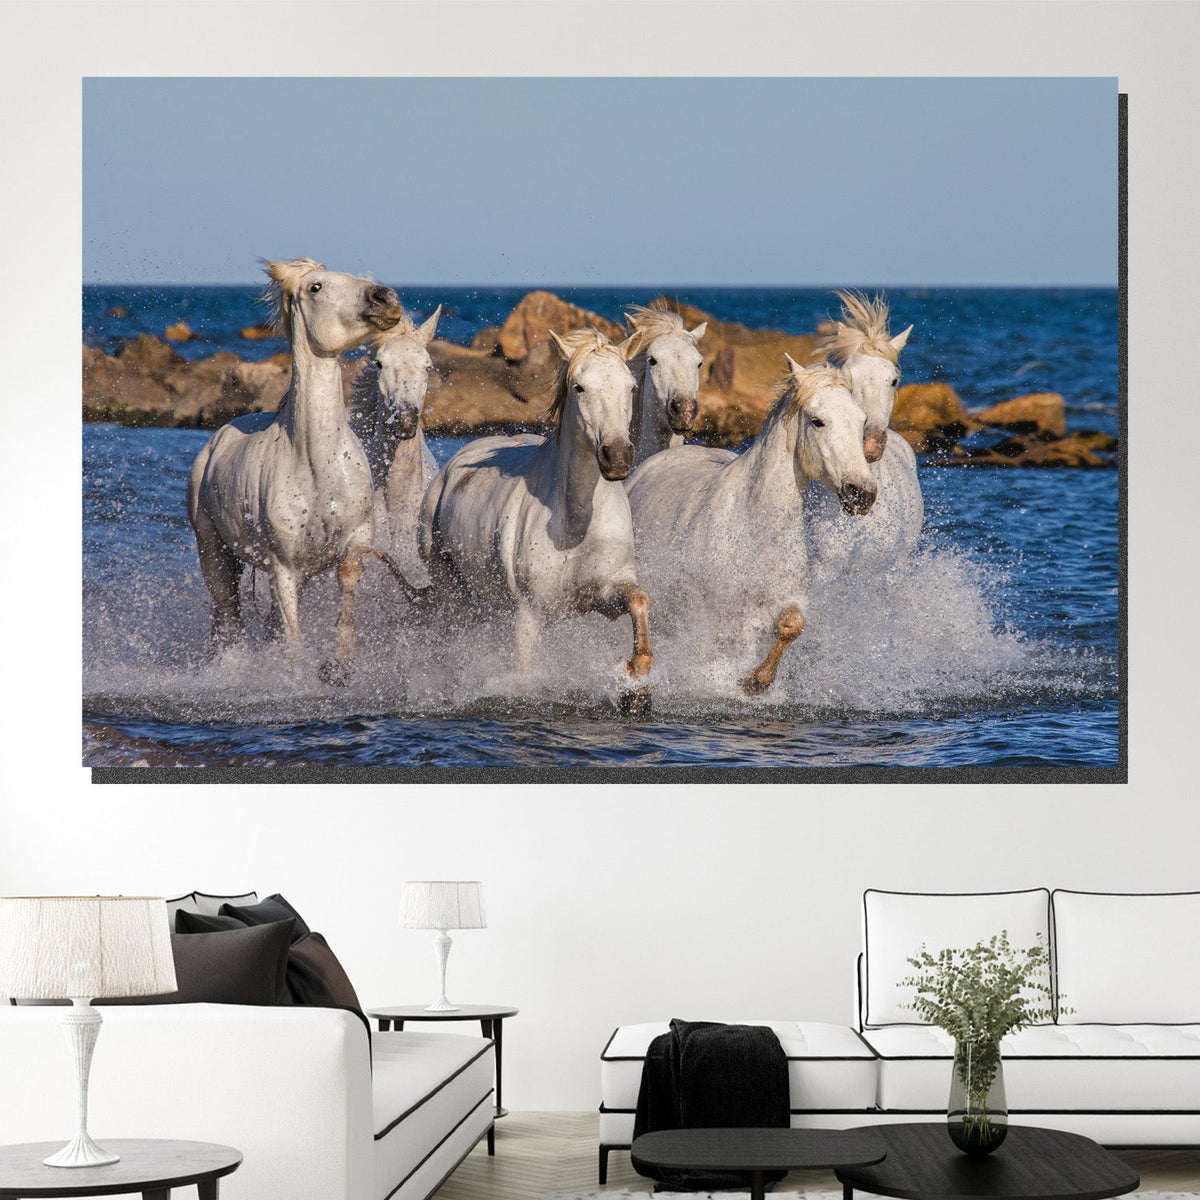 https://cdn.shopify.com/s/files/1/0387/9986/8044/products/WhiteCamargueHorsesCanvasArtprintStretched-4.jpg